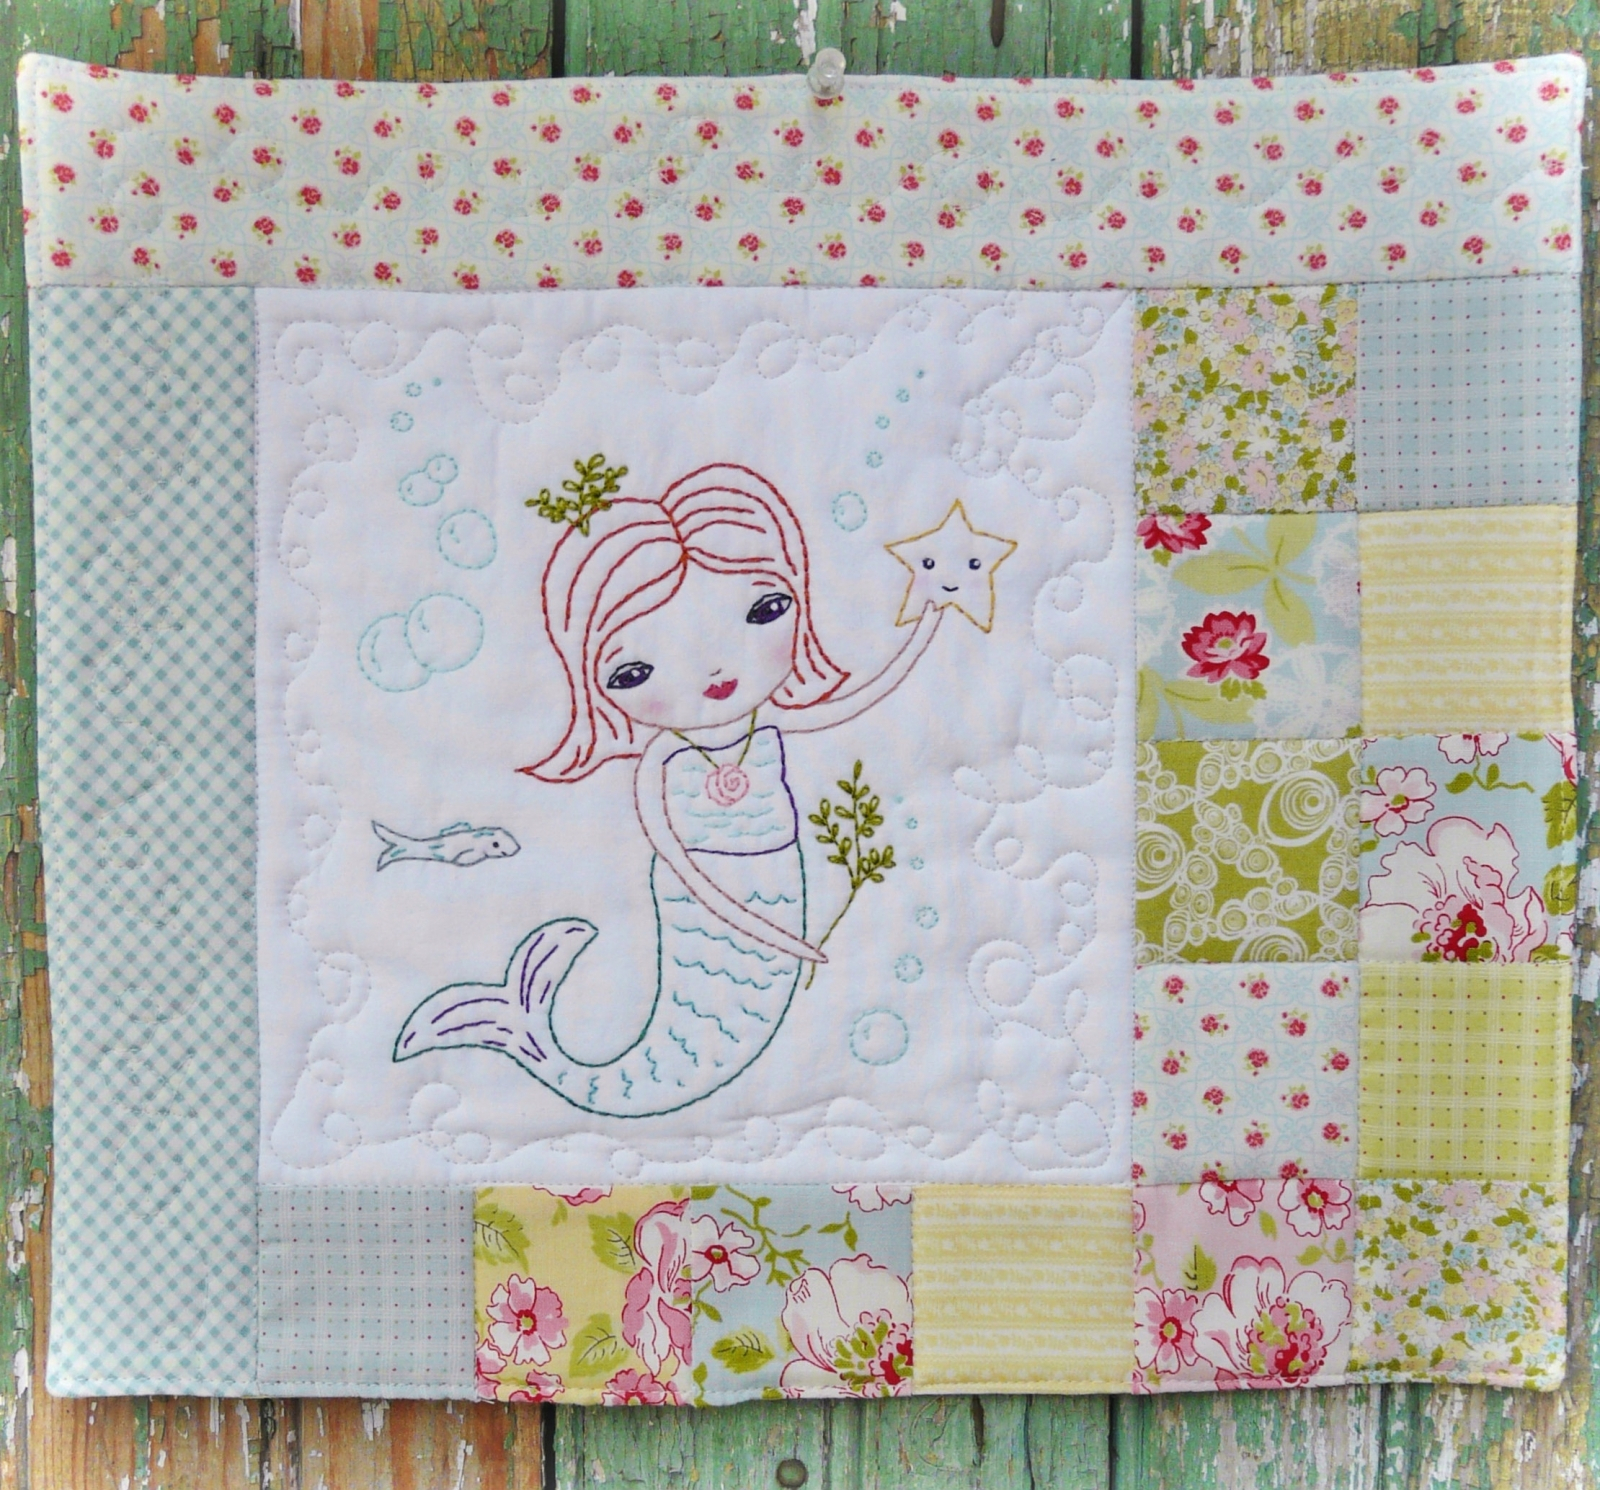 Embroidery Quilt Patterns The Merry Mermaid Embroidery Mini Quilt Pattern 371